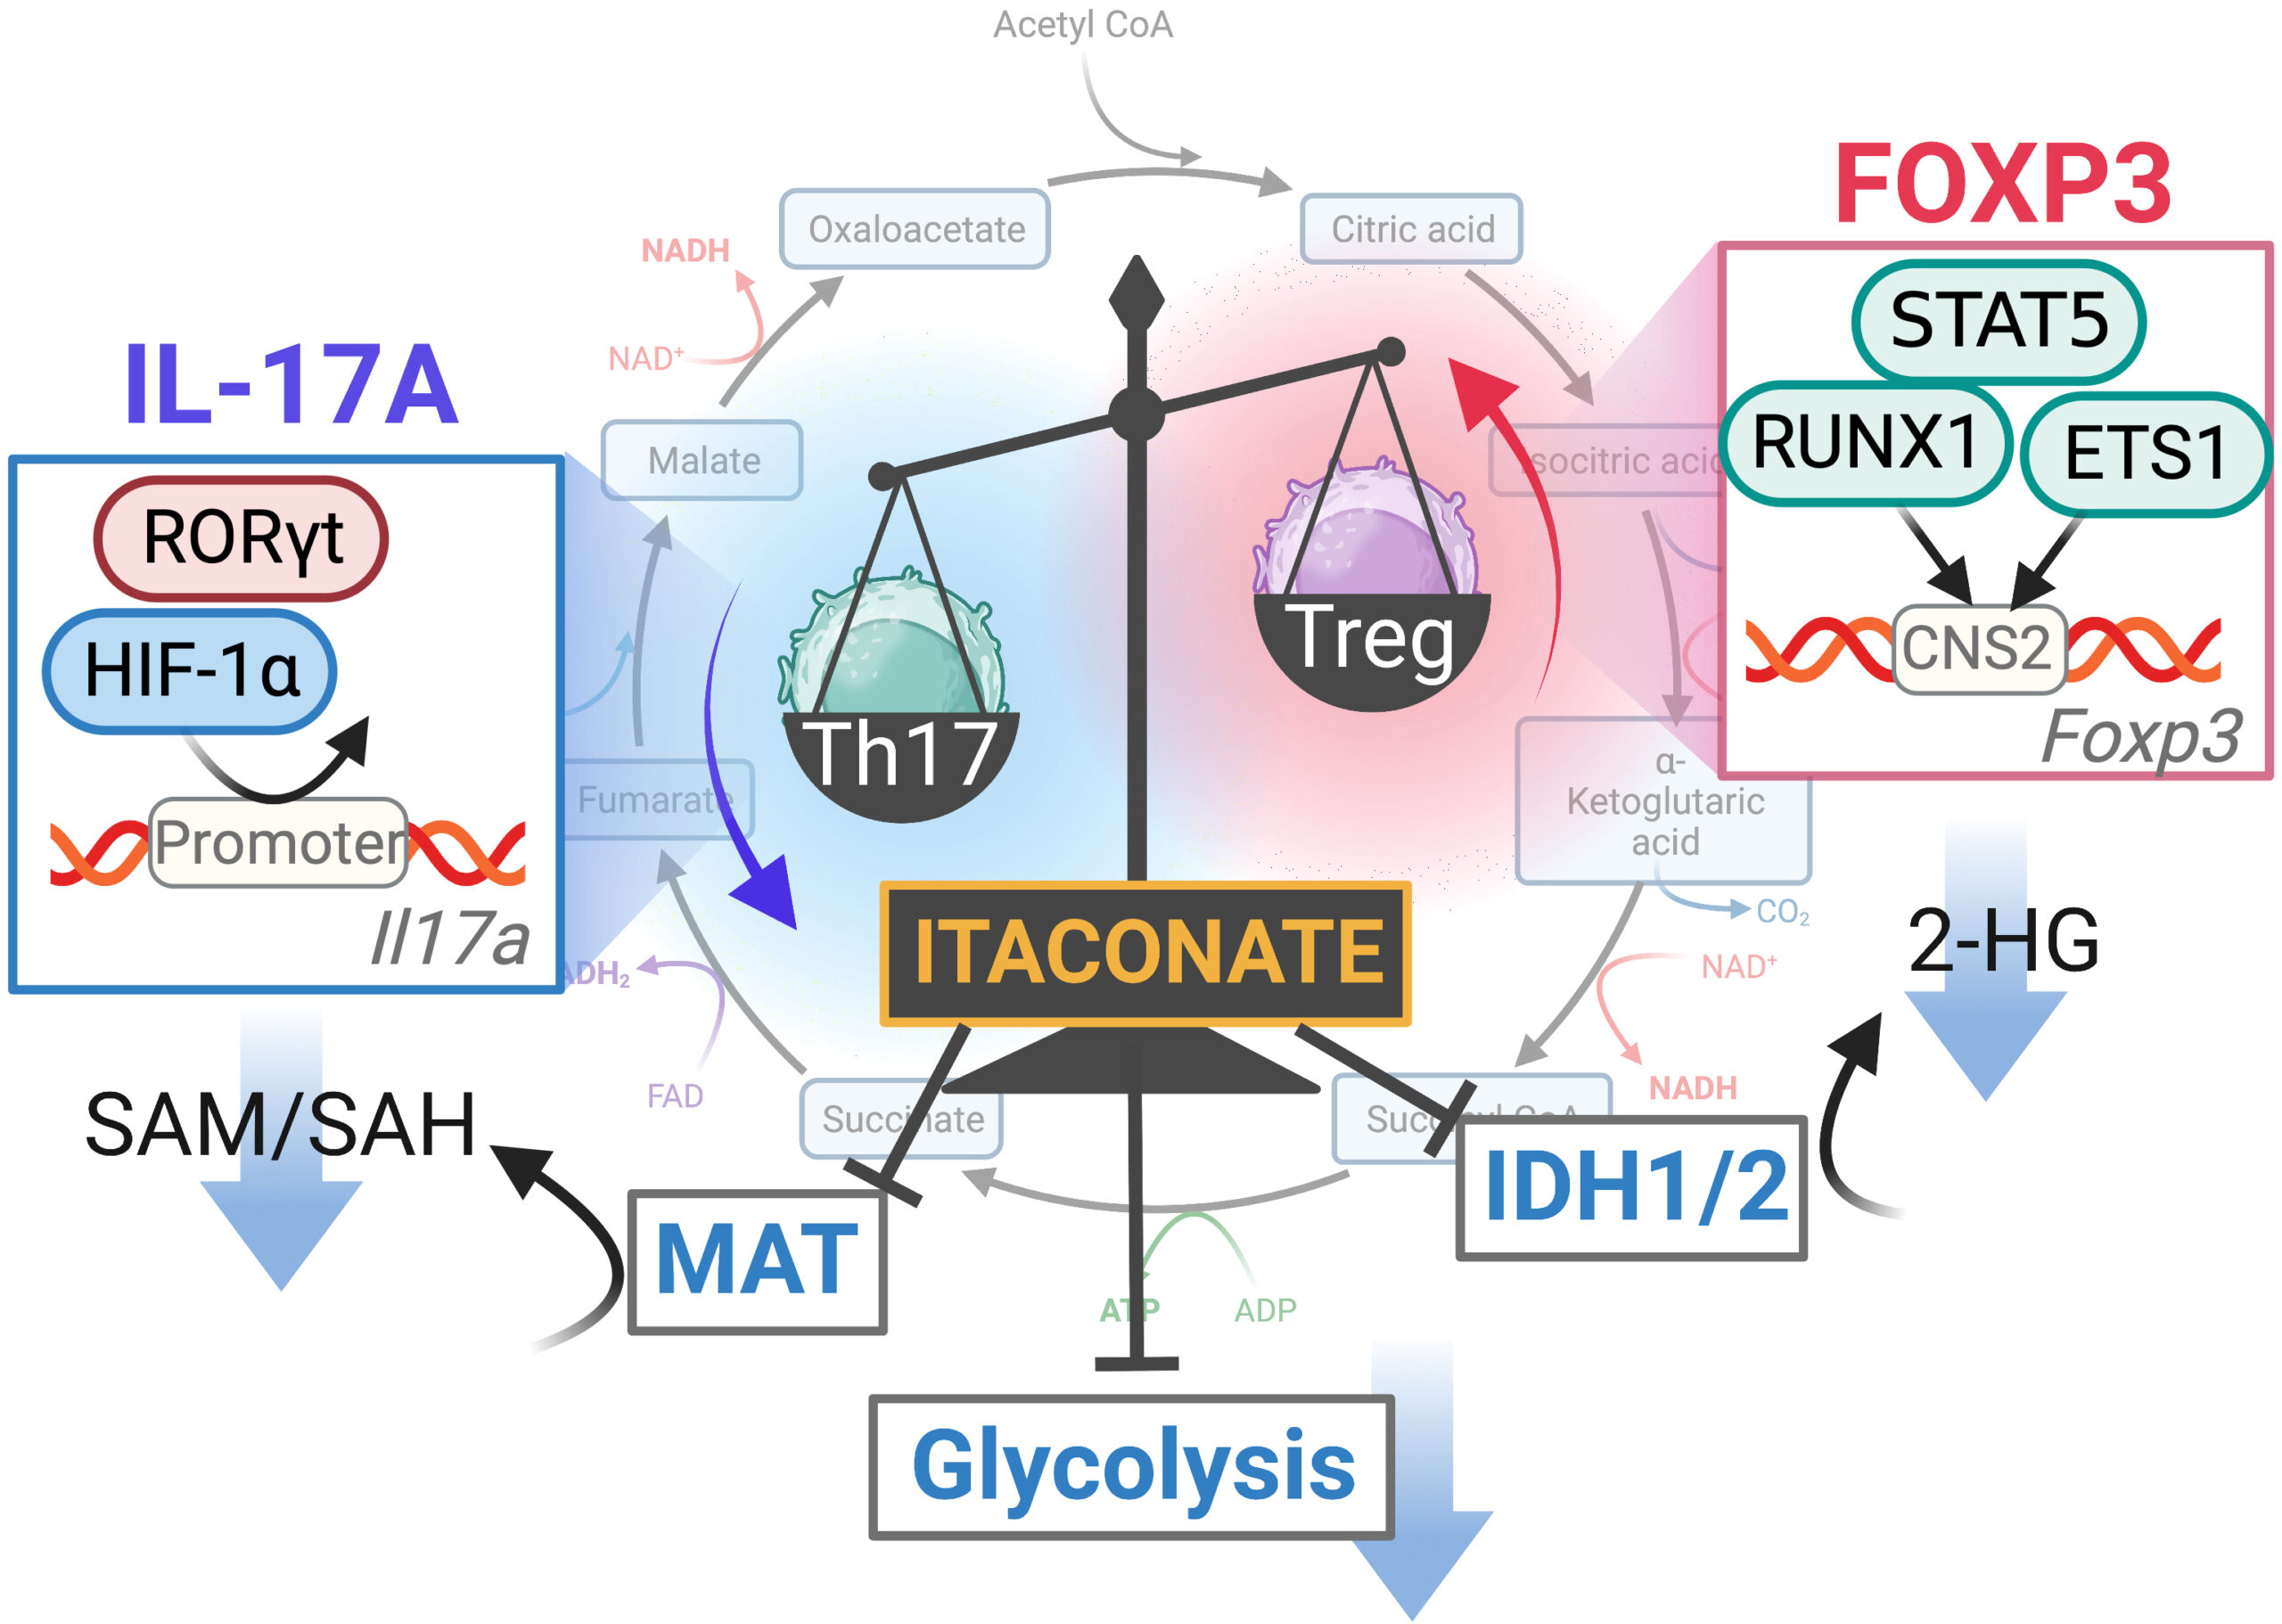 Itaconate (ITA) inhibits the differentiation of Th17 cells and promotes the differentiation of Treg cells by inhibiting glycolysis, methionine adenosyltransferase (MAT) and isocitrate dehydrogenase (IDH1/2), which in influence expression of the cytokine IL-17A and the regulator protein FOXP3 (Michihito Kono).